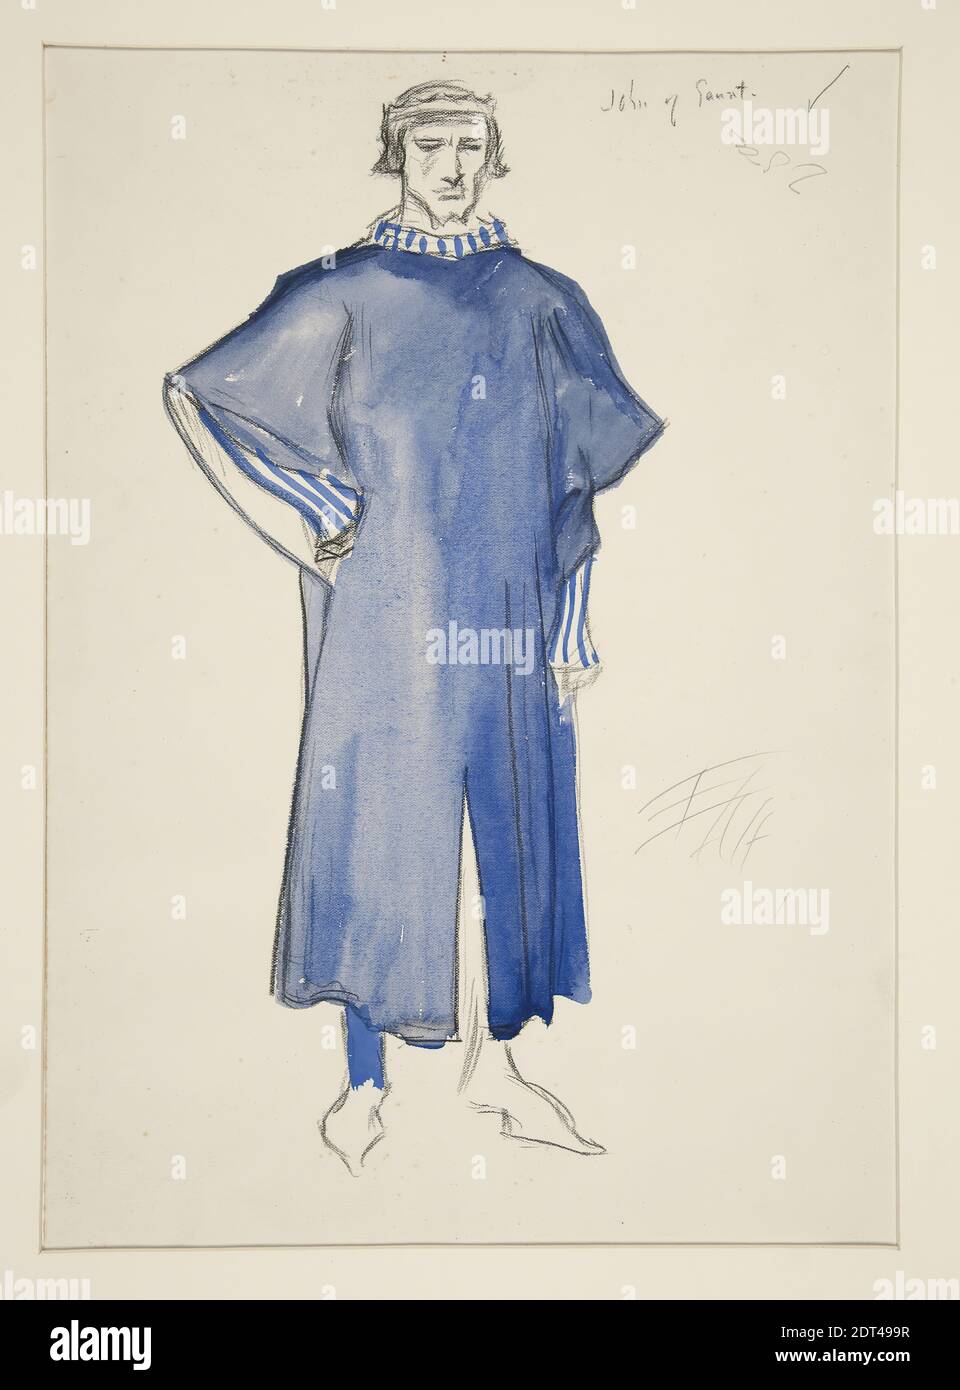 Artist: Edwin Austin Abbey, American, 1852–1911, M.A., 1897, John of Gaunt, costume sketch for Henry Irving’s Planned Production of King Richard II, Watercolor, black chalk, White wove, 35.5 × 25.2 cm (14 × 9 15/16 in.), Made in United States, American, 19th century, Works on Paper - Drawings and Watercolors Stock Photo